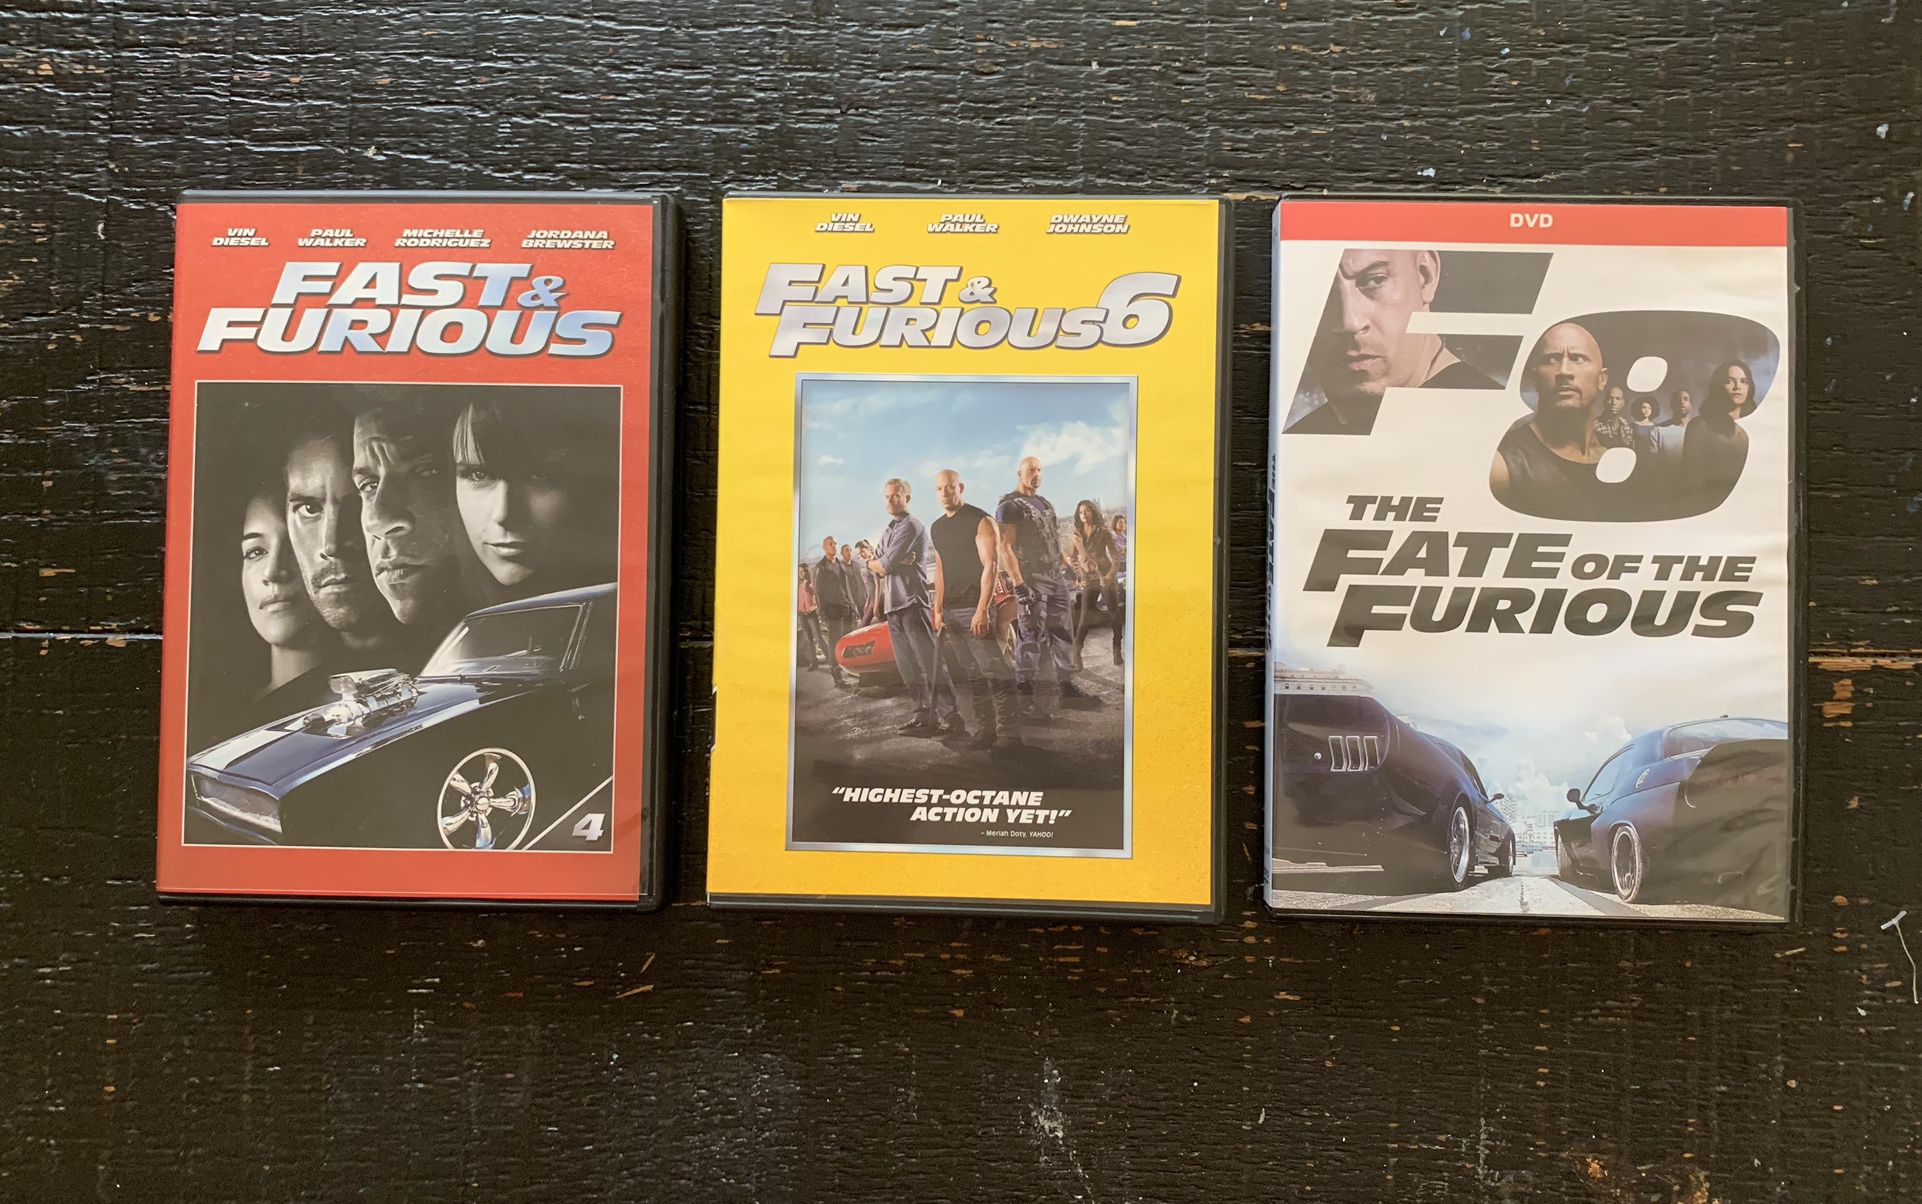 Fast & Furious DVD’s